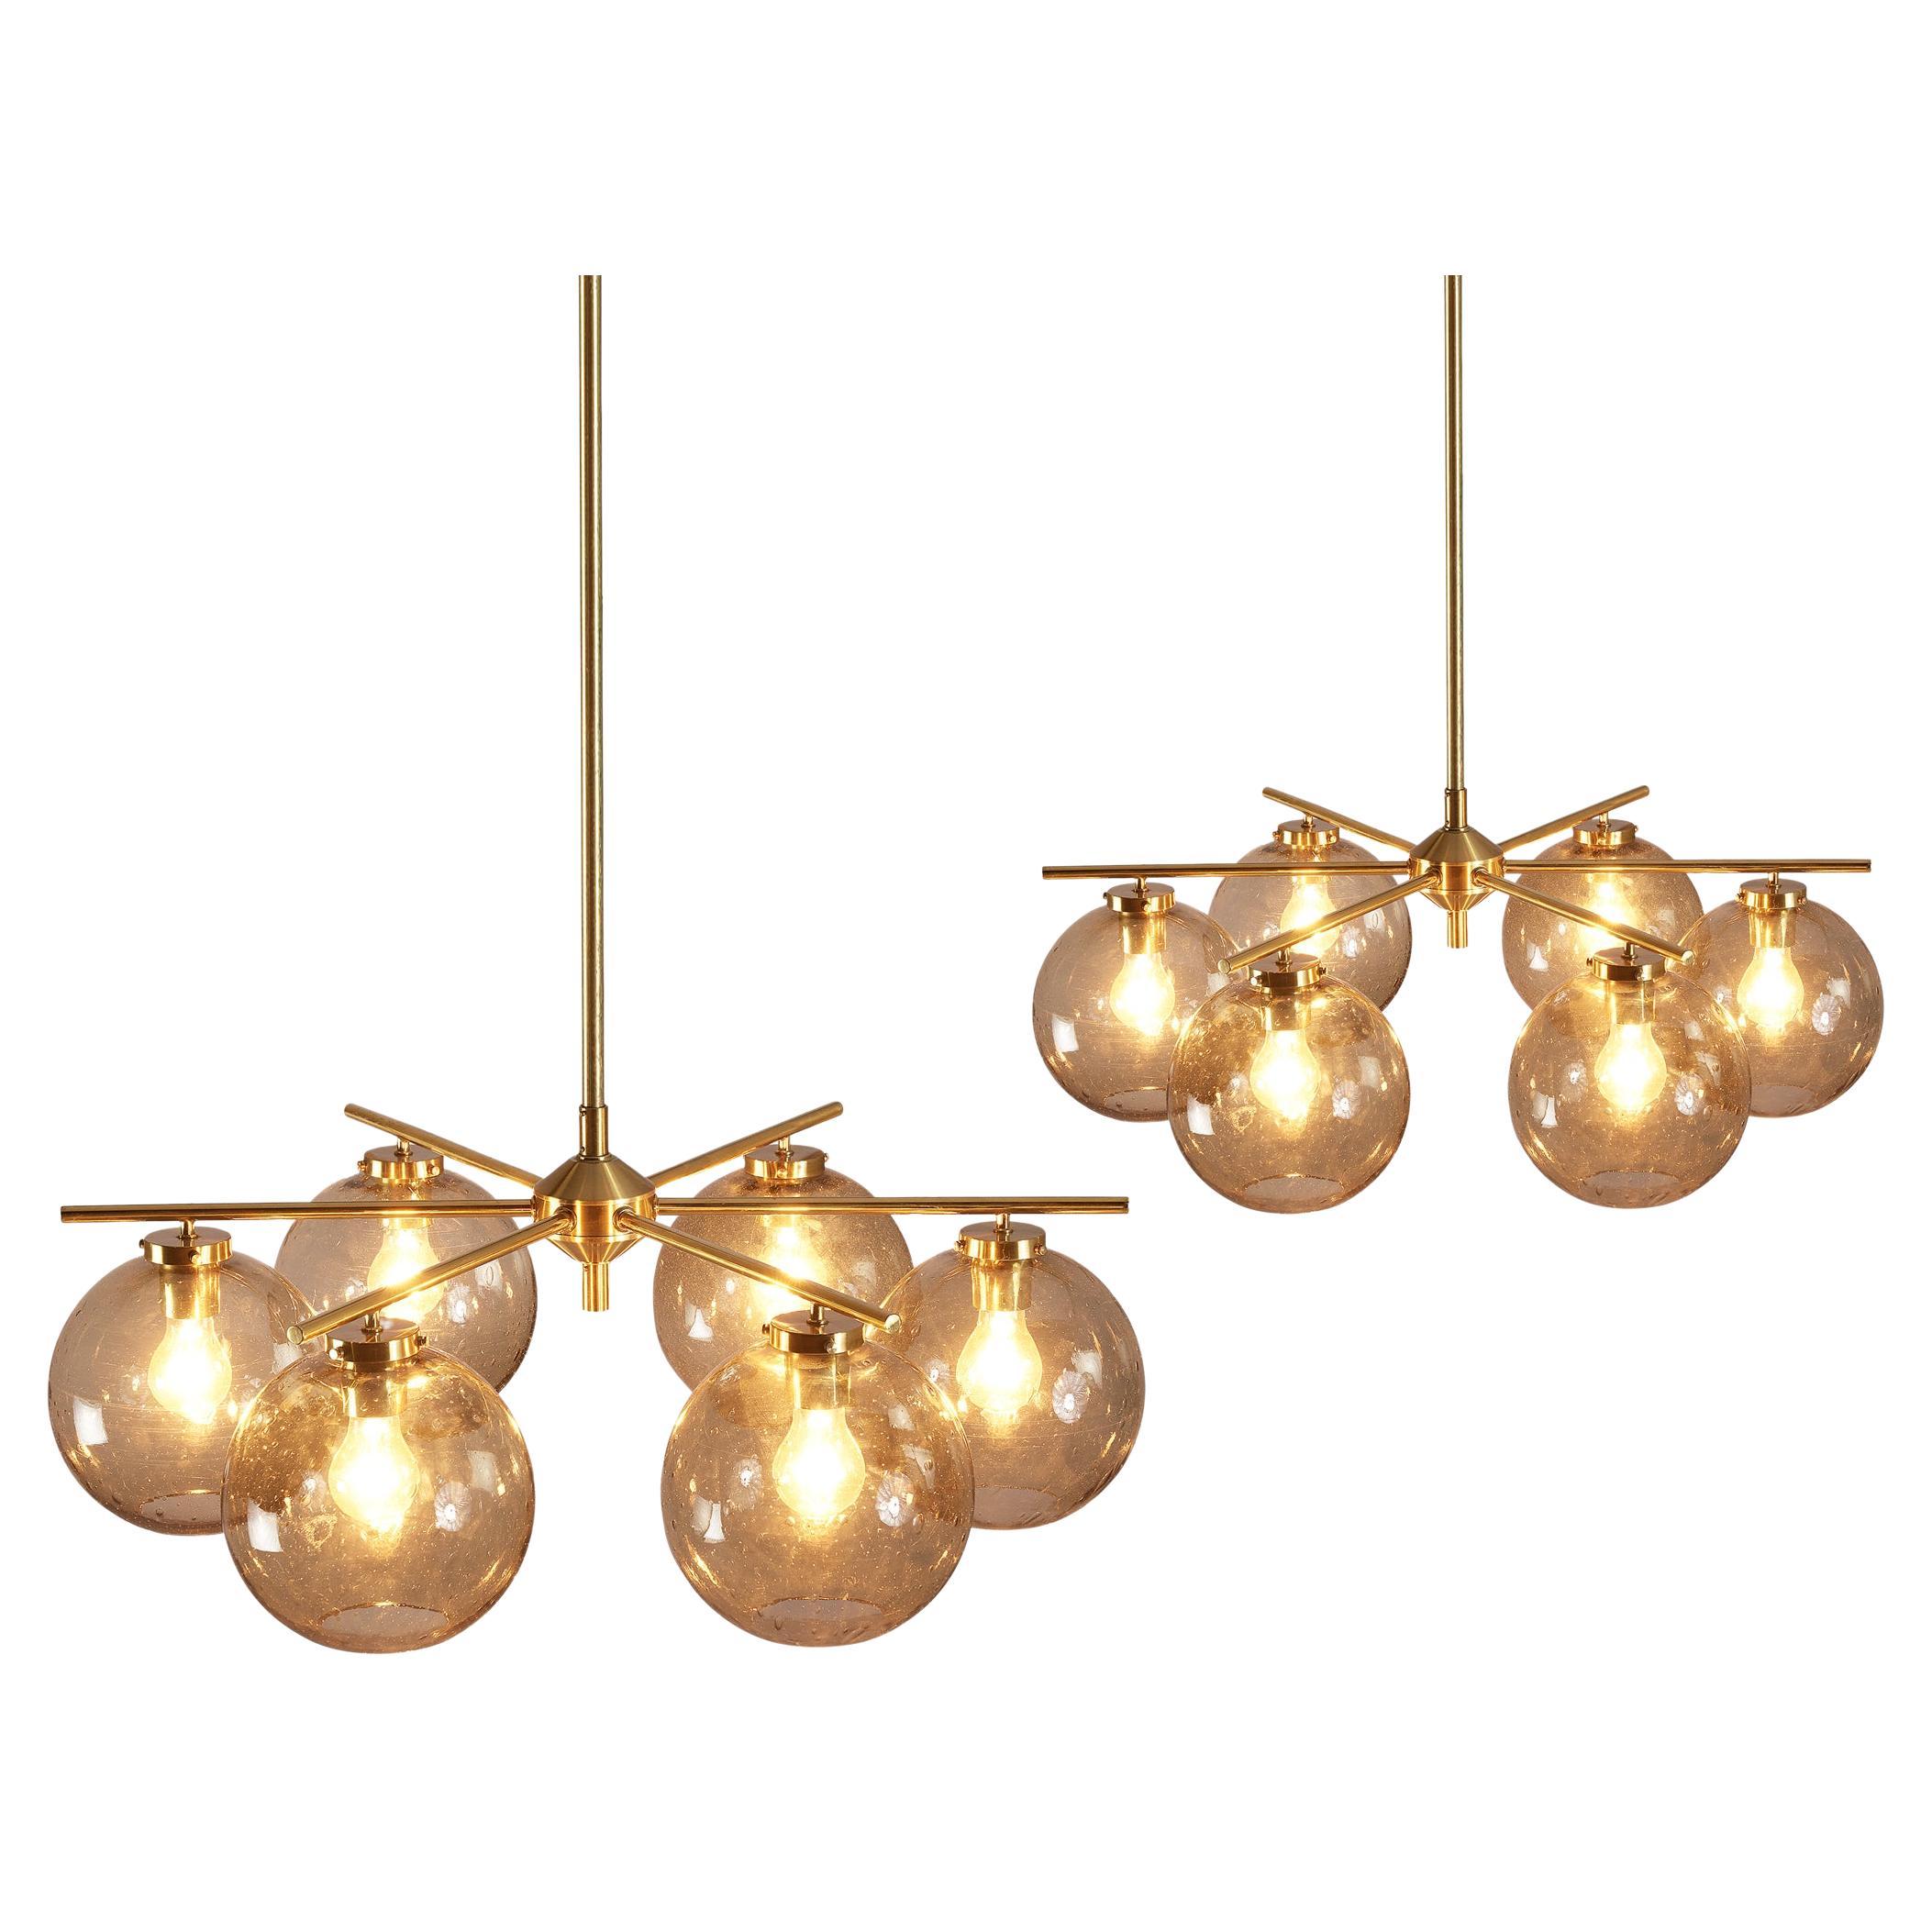 Holger Johansson for Westal Chandeliers in Brass and Smoked Glass  For Sale